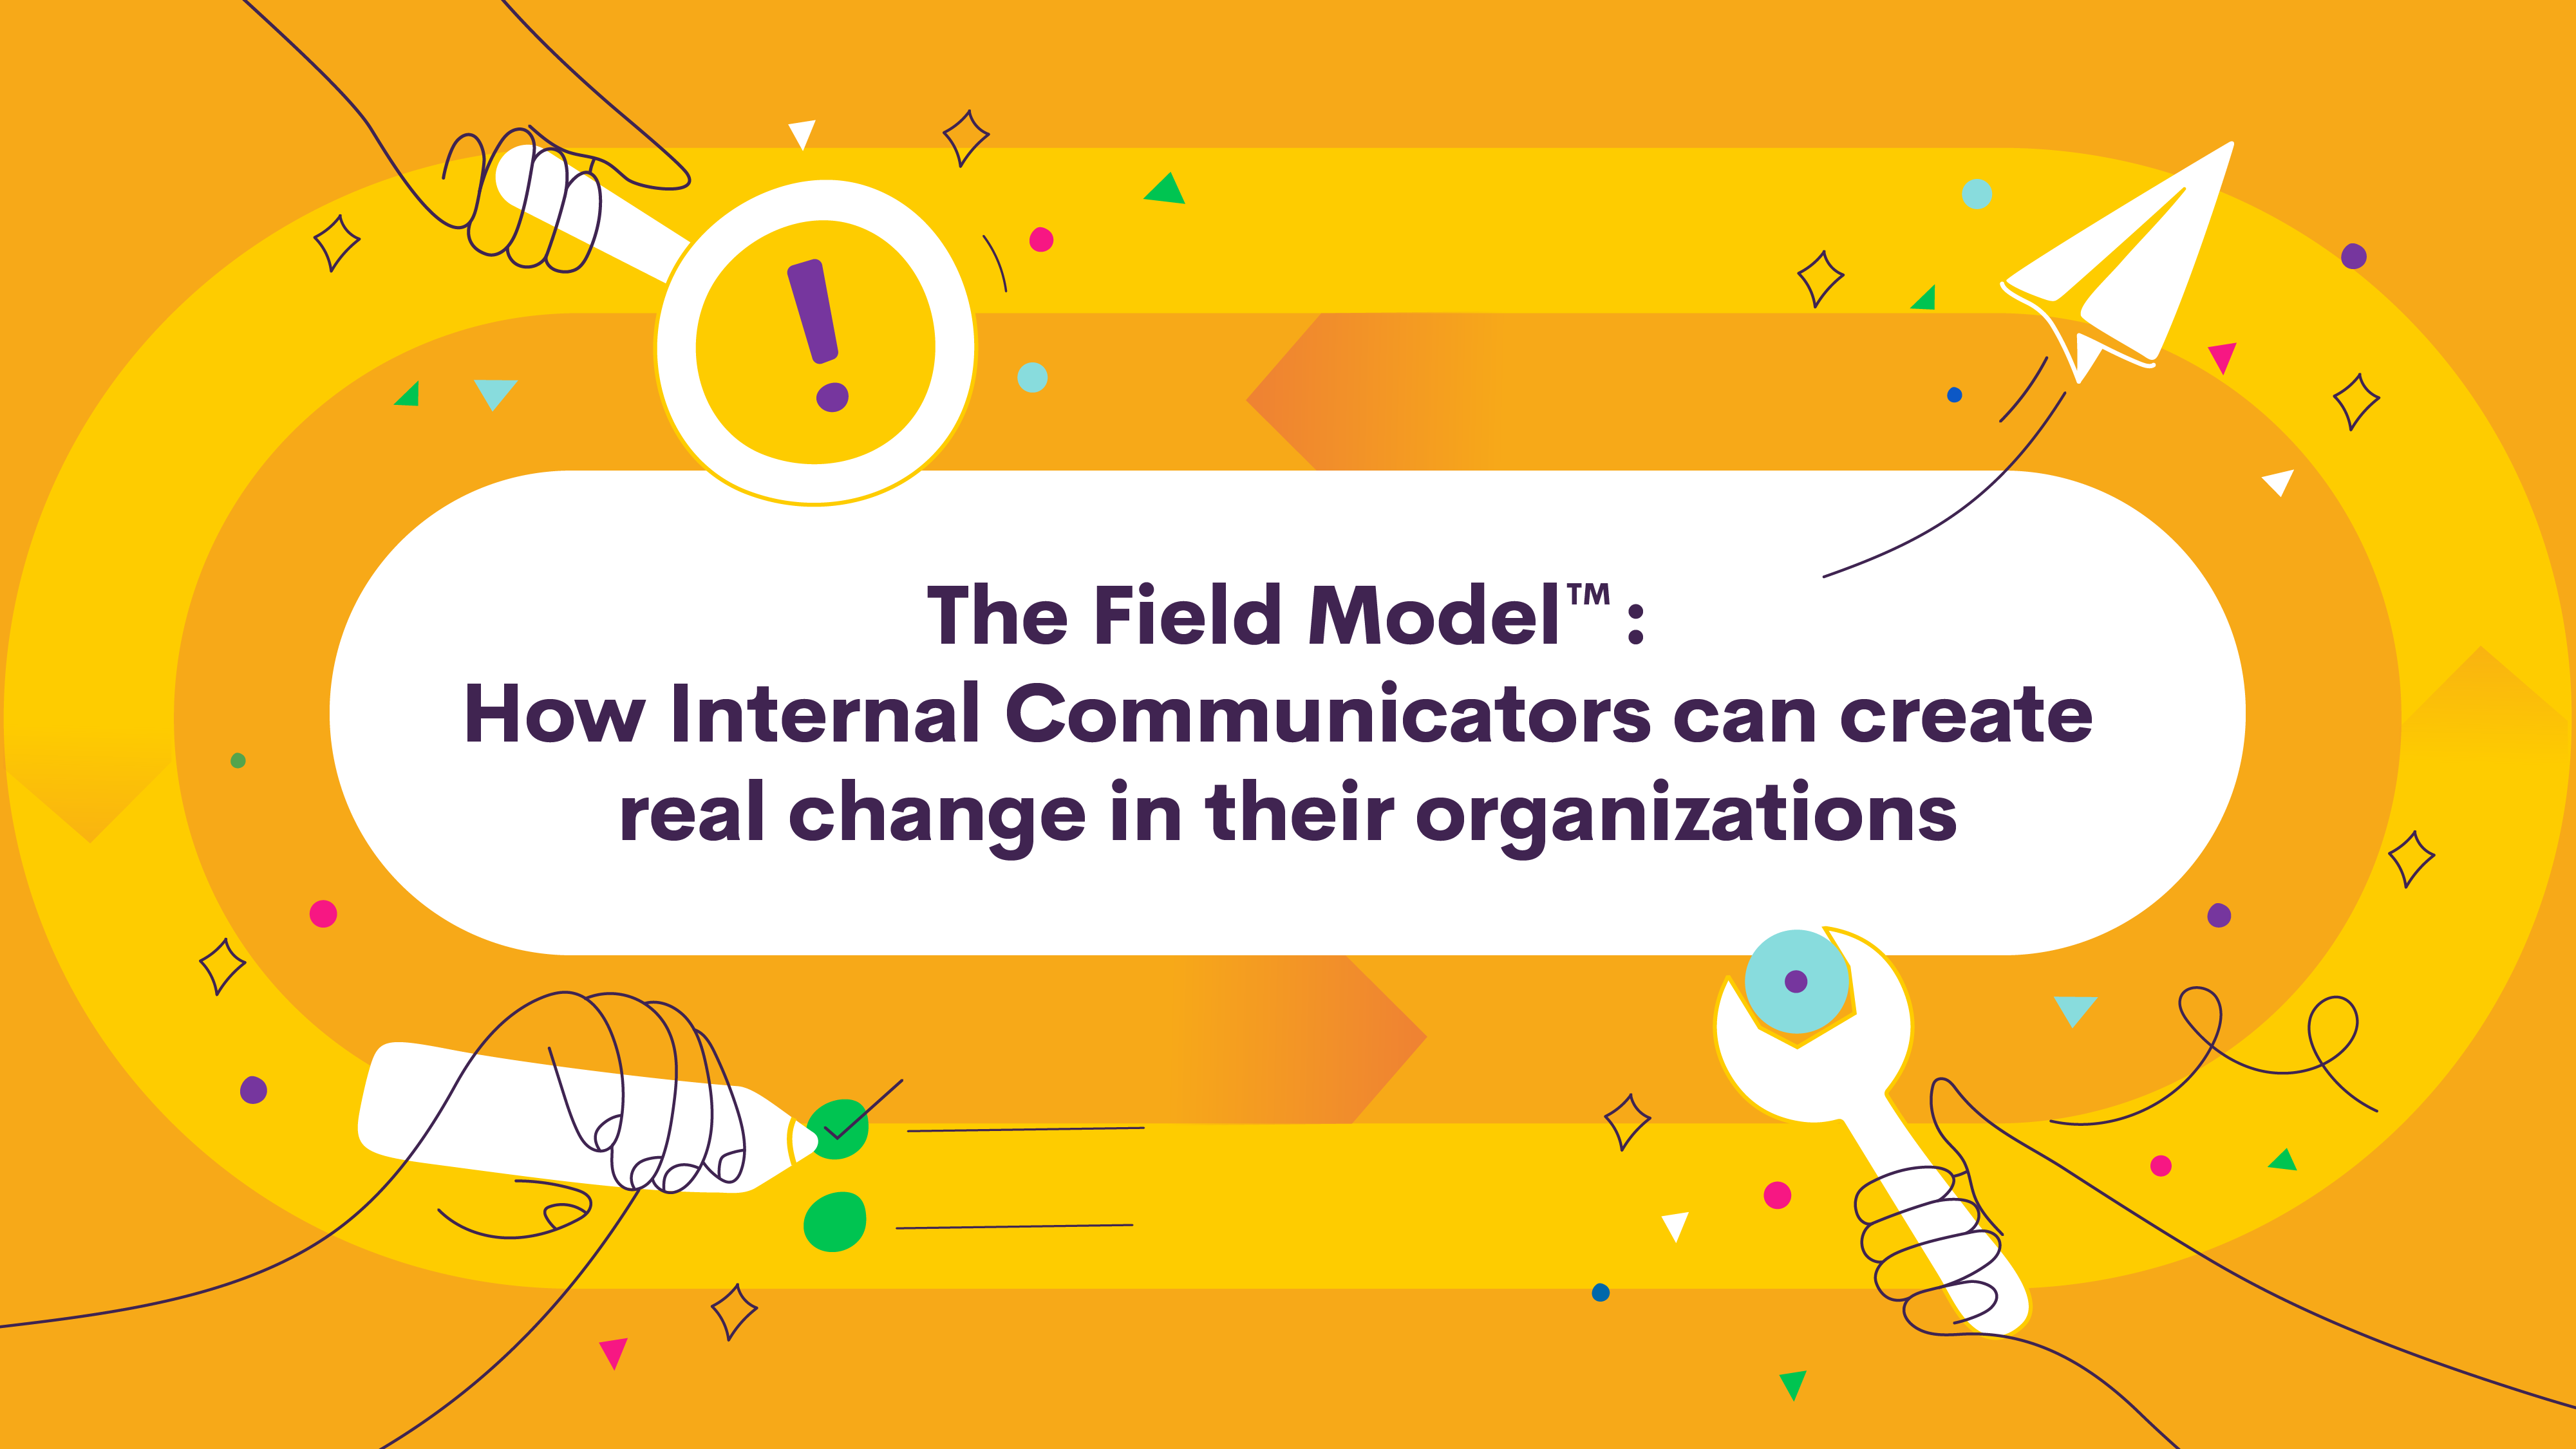 The Field Model ™ — How Internal Communicators Can Create Real Change in Their Organizations